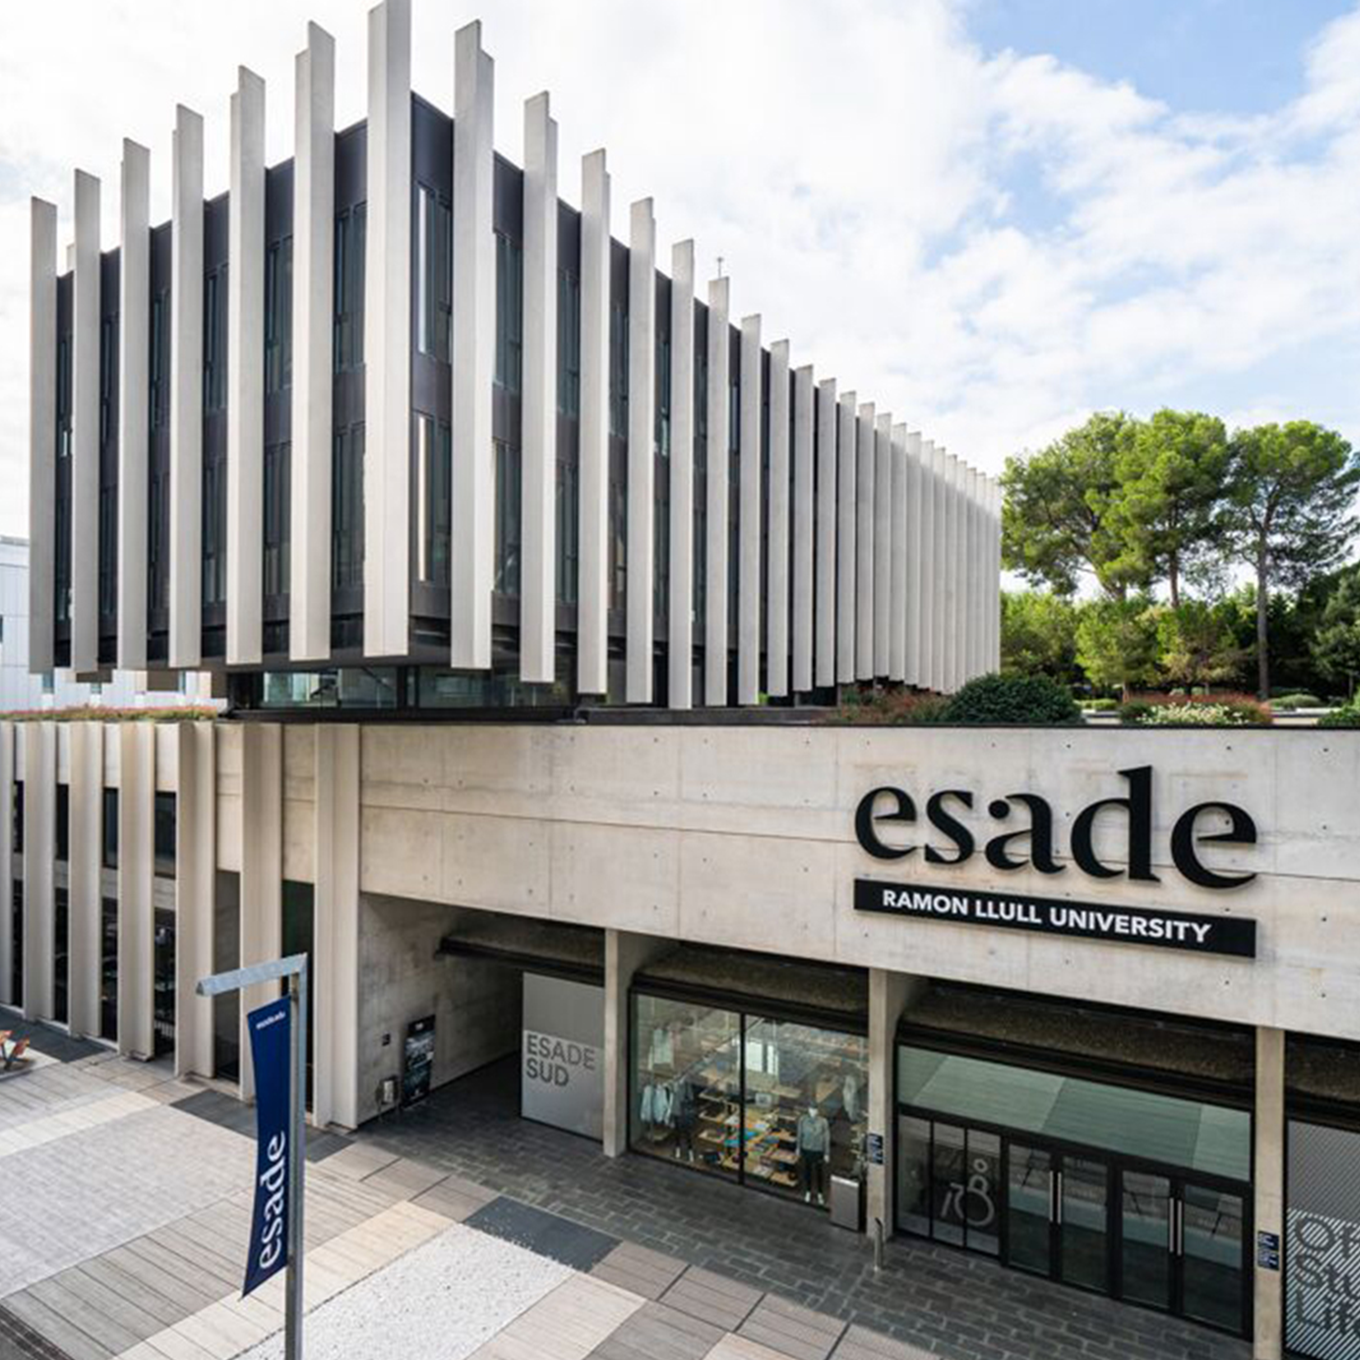 The esade university building is on the corner of a street.